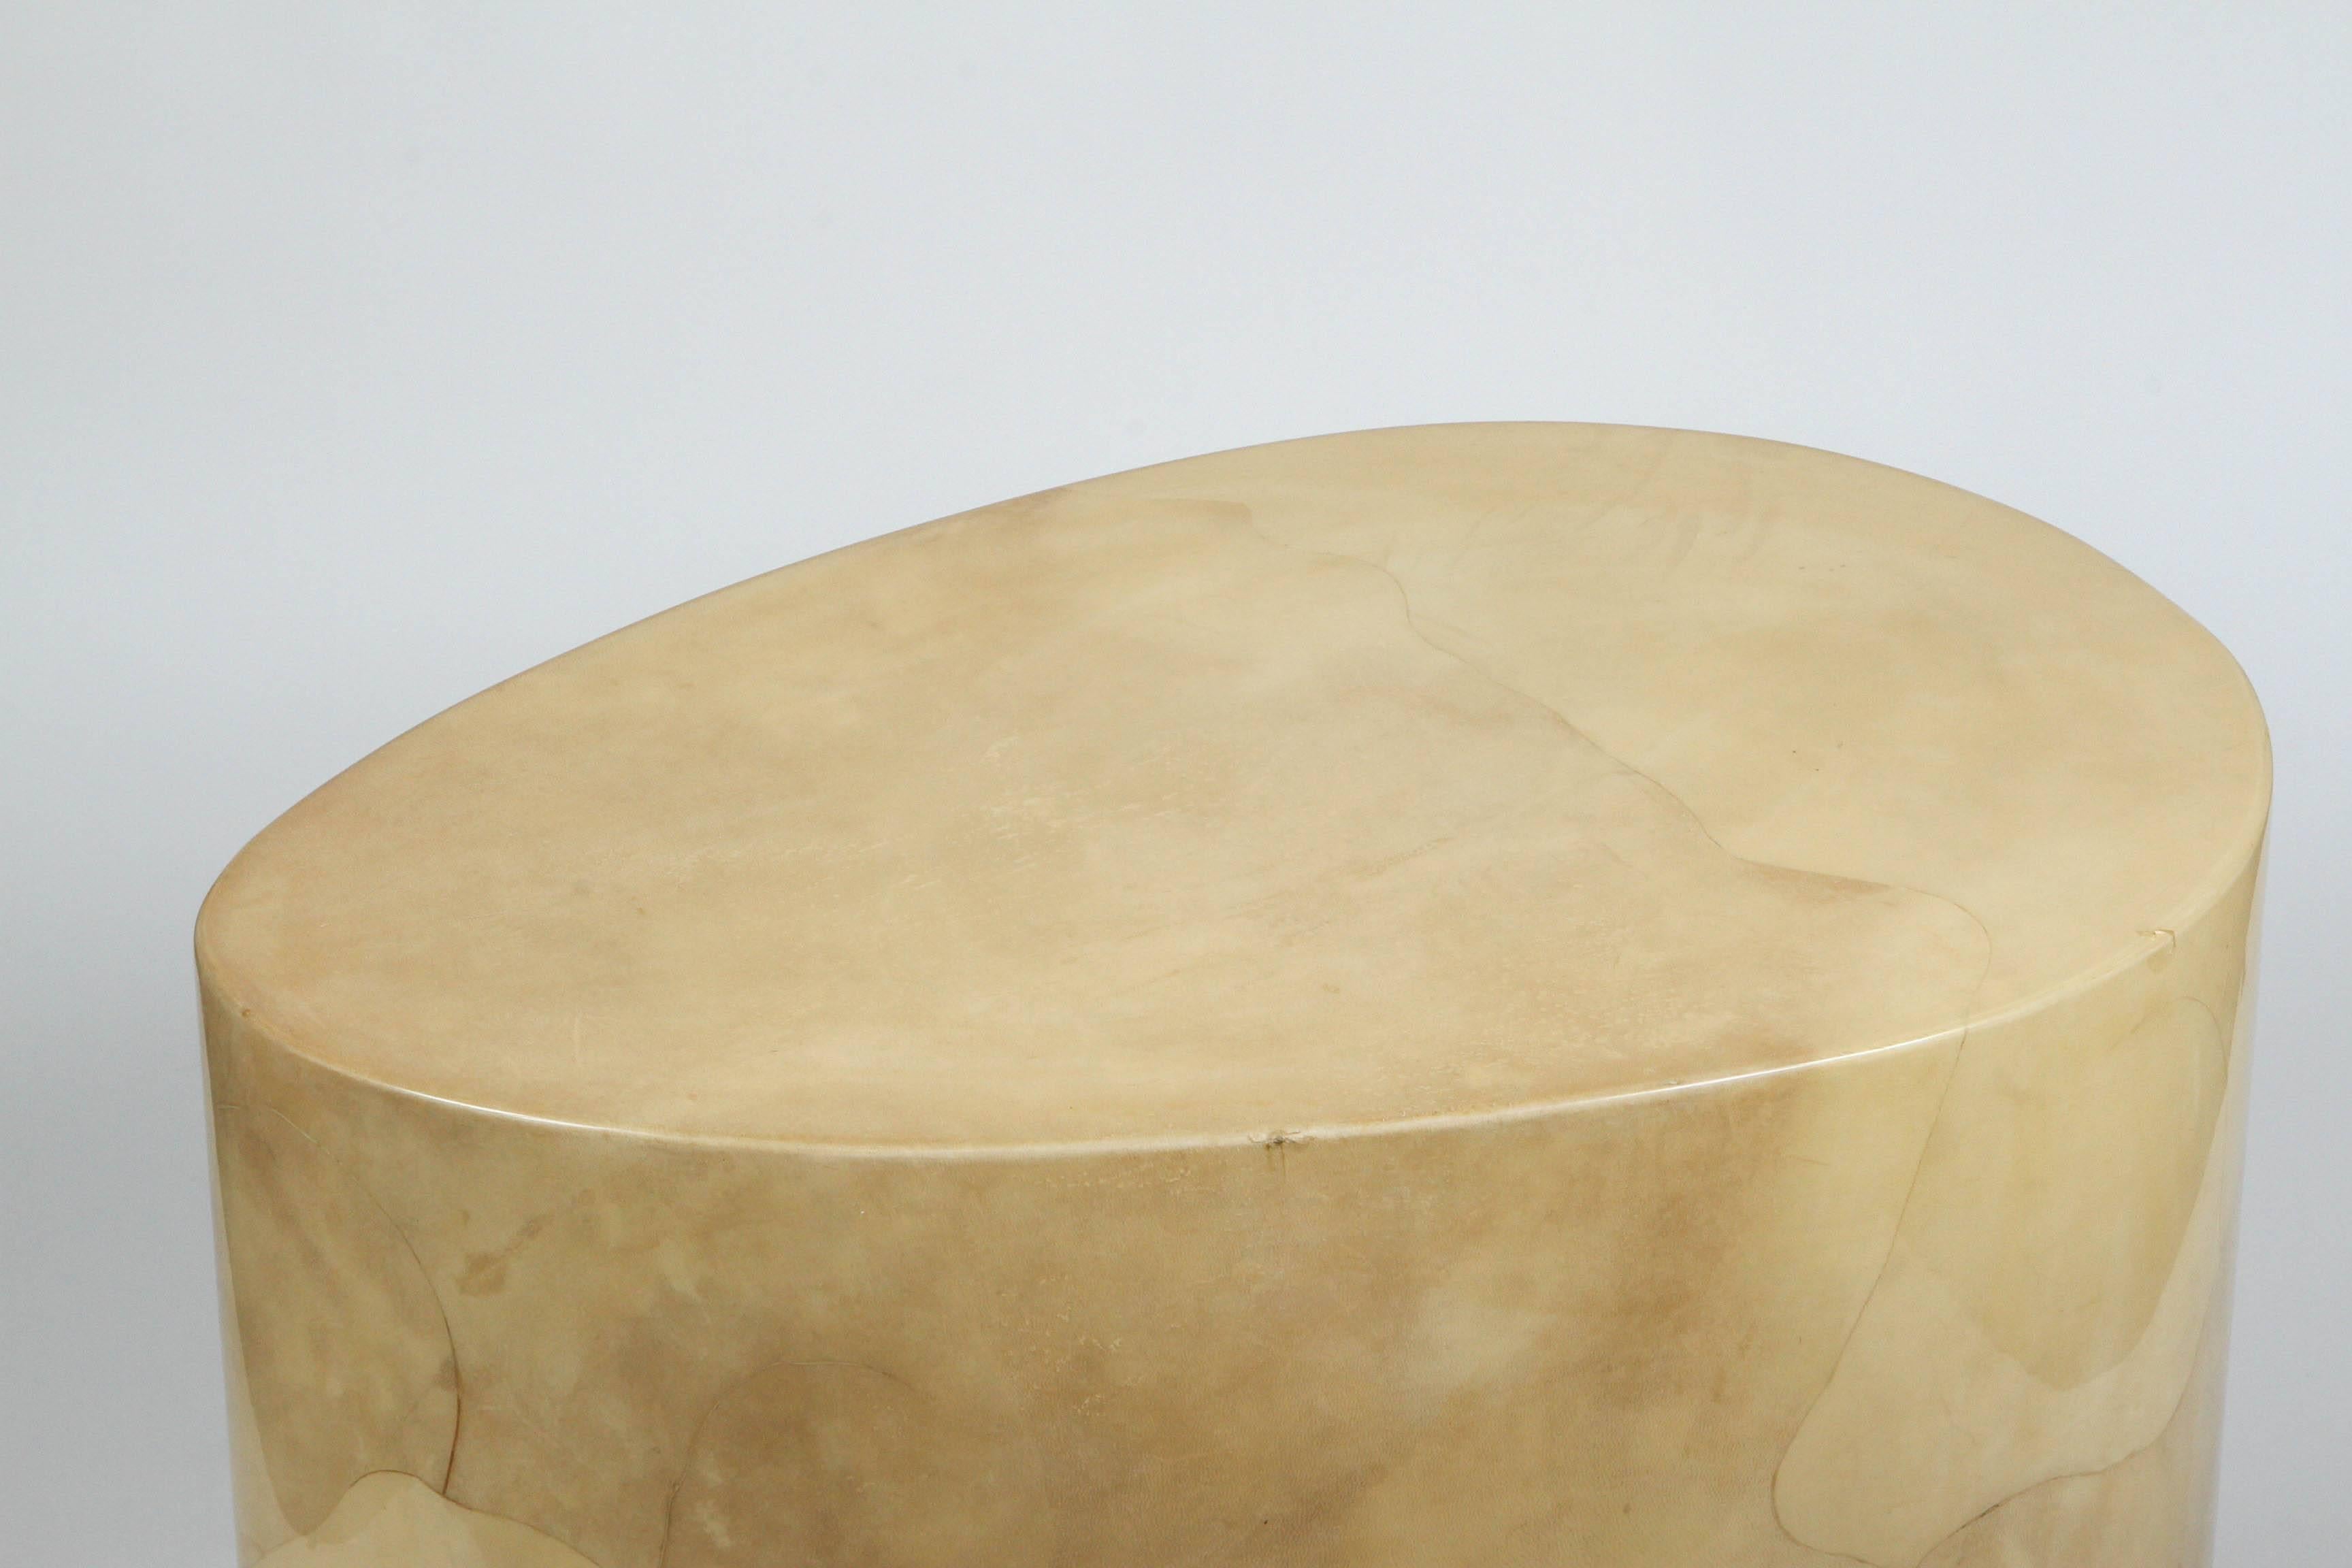 Kidney shaped biomorphic coffee or cocktail table in faux skin or parchment.
Lacquered wood faux skin parchment in ivory earth tones in the style of Karl Springer. 
Great organic design, USA, circa 1980s.
Perfect for use as a coffee table or end